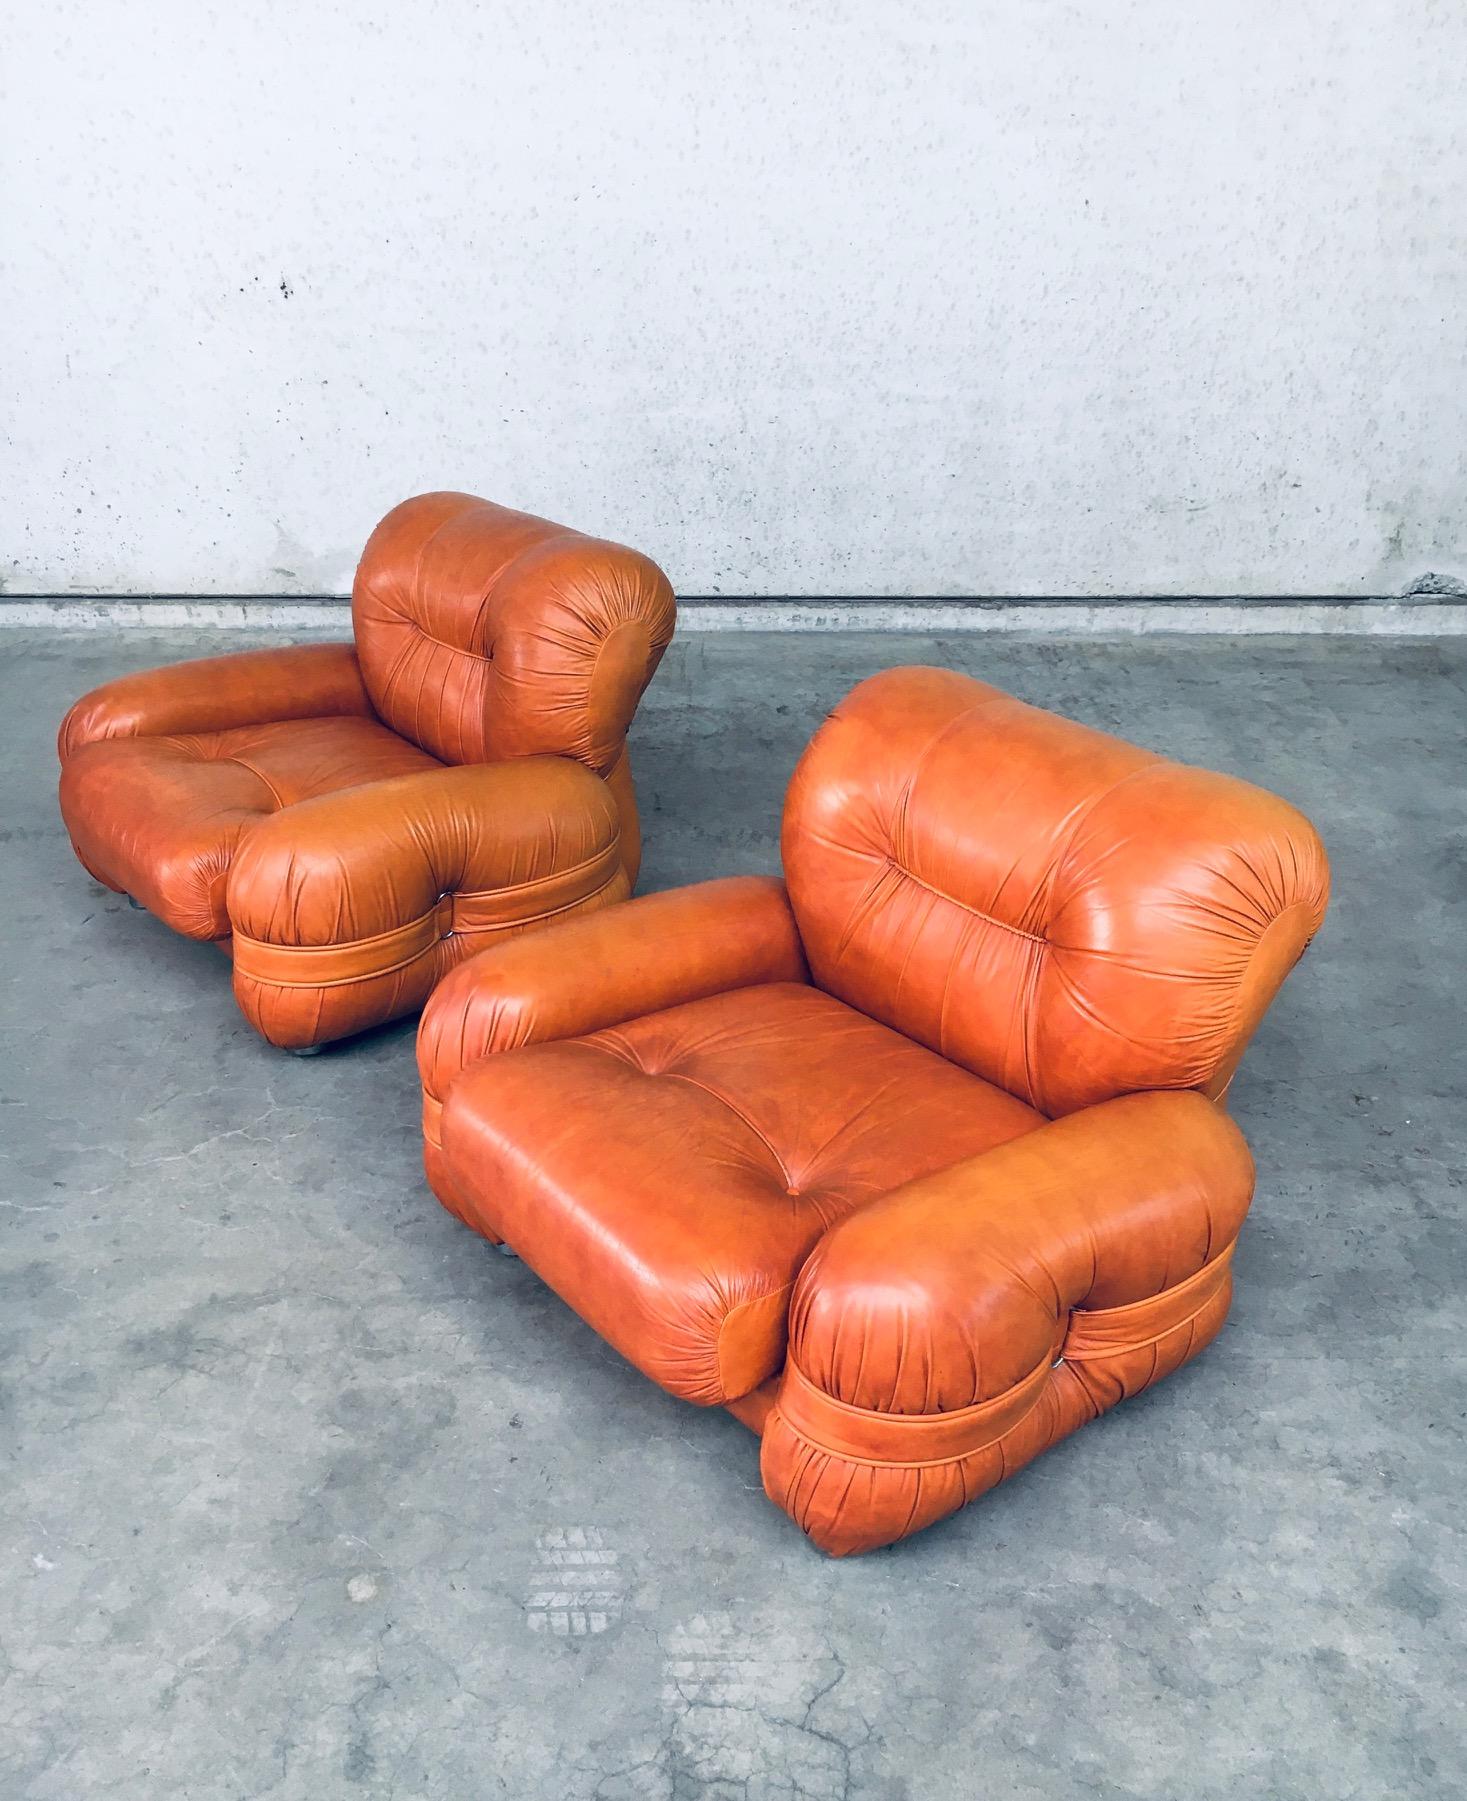 Vintage Midcentury Modern Italian Design Leather Lounge Chair set of 2. Made in Italy, 1960's / 70's period. Cognac leather arm chairs with straps and buckles on the side rests. Bulbous shapes on this very comfy and beautiful lounge chairs. These